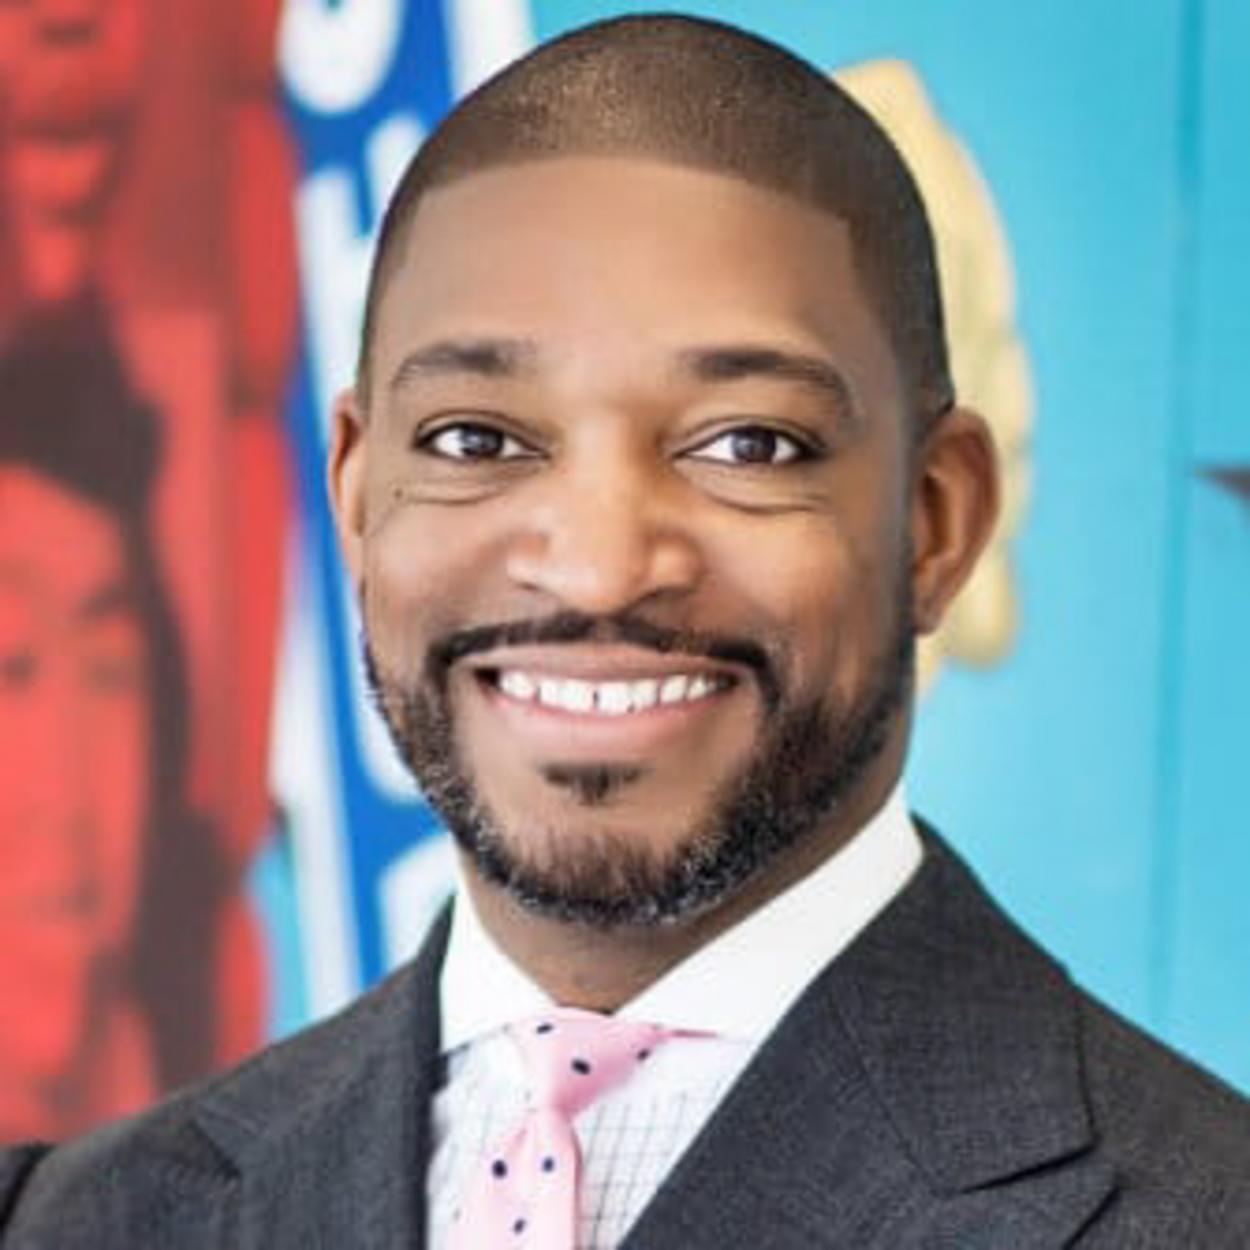 Portrait of Rev. Dr. Starsky Wilson, a Black man smiling broadly in front of a colorful background. He has closely trimmed hair, and a closely trimmed beard, and is wearing a dark grey suit, a white shirt, and a light pink tie with small black dots. 